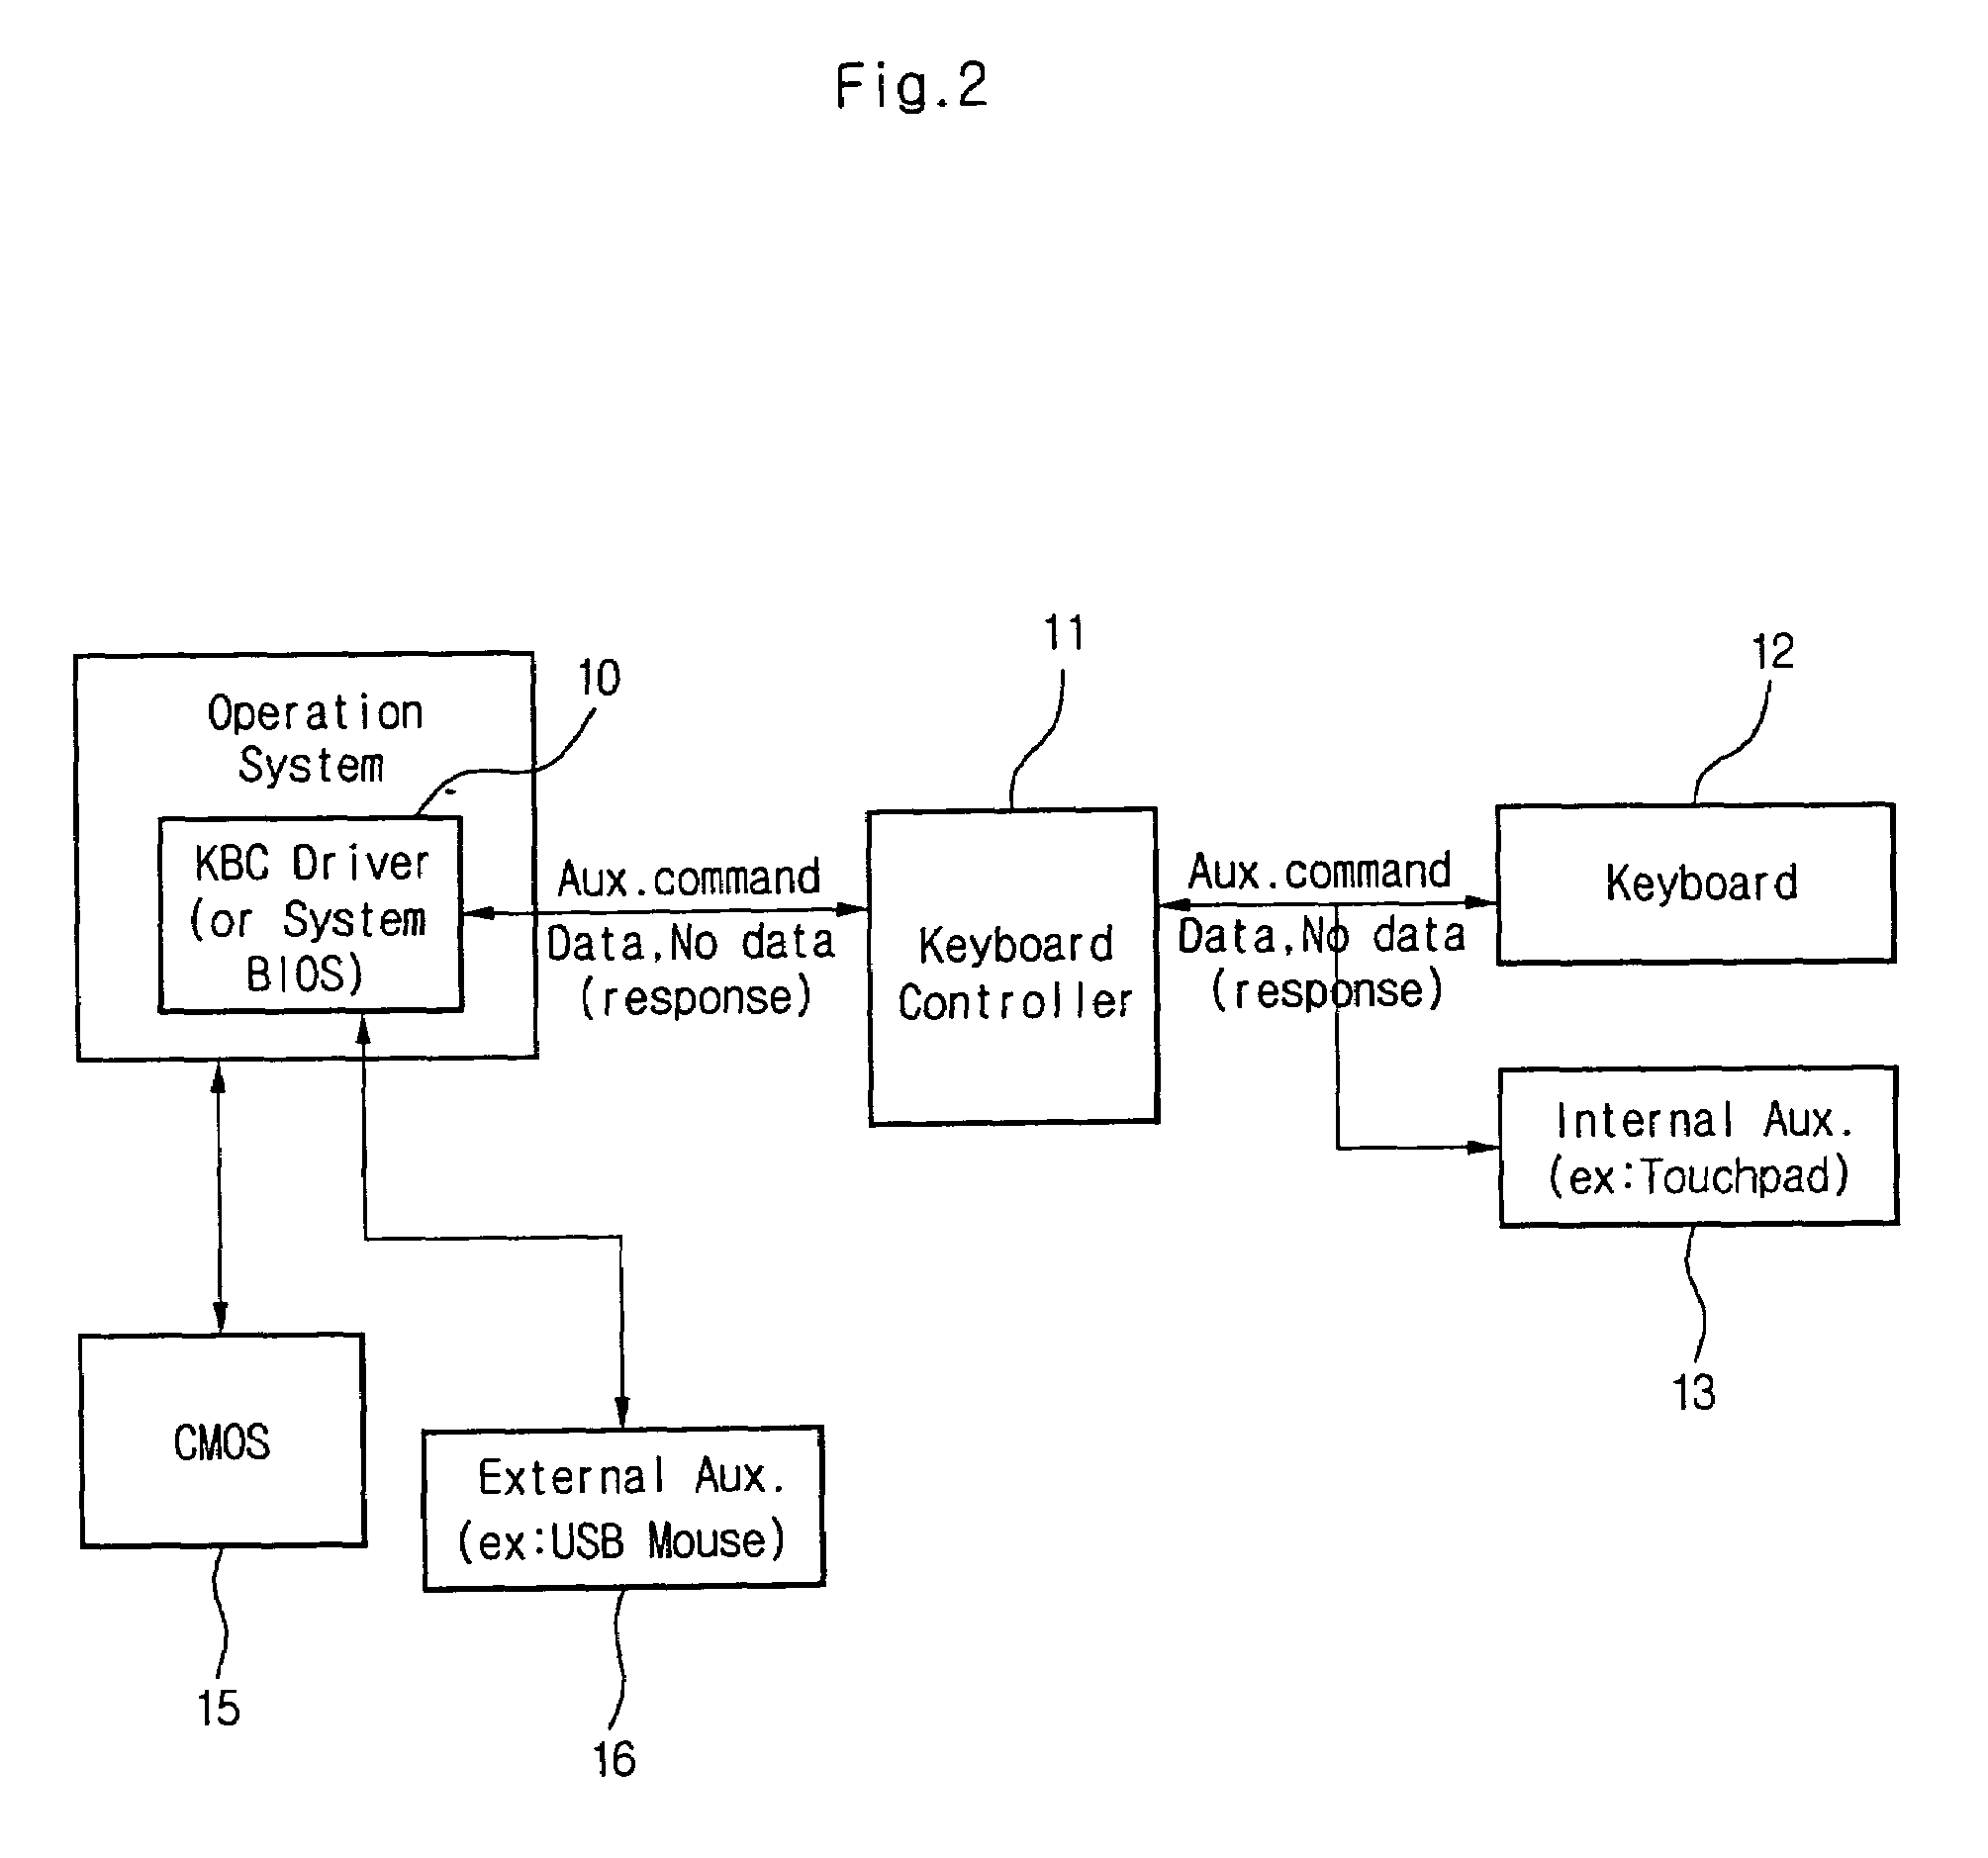 Apparatus and method for controlling device operation in computer